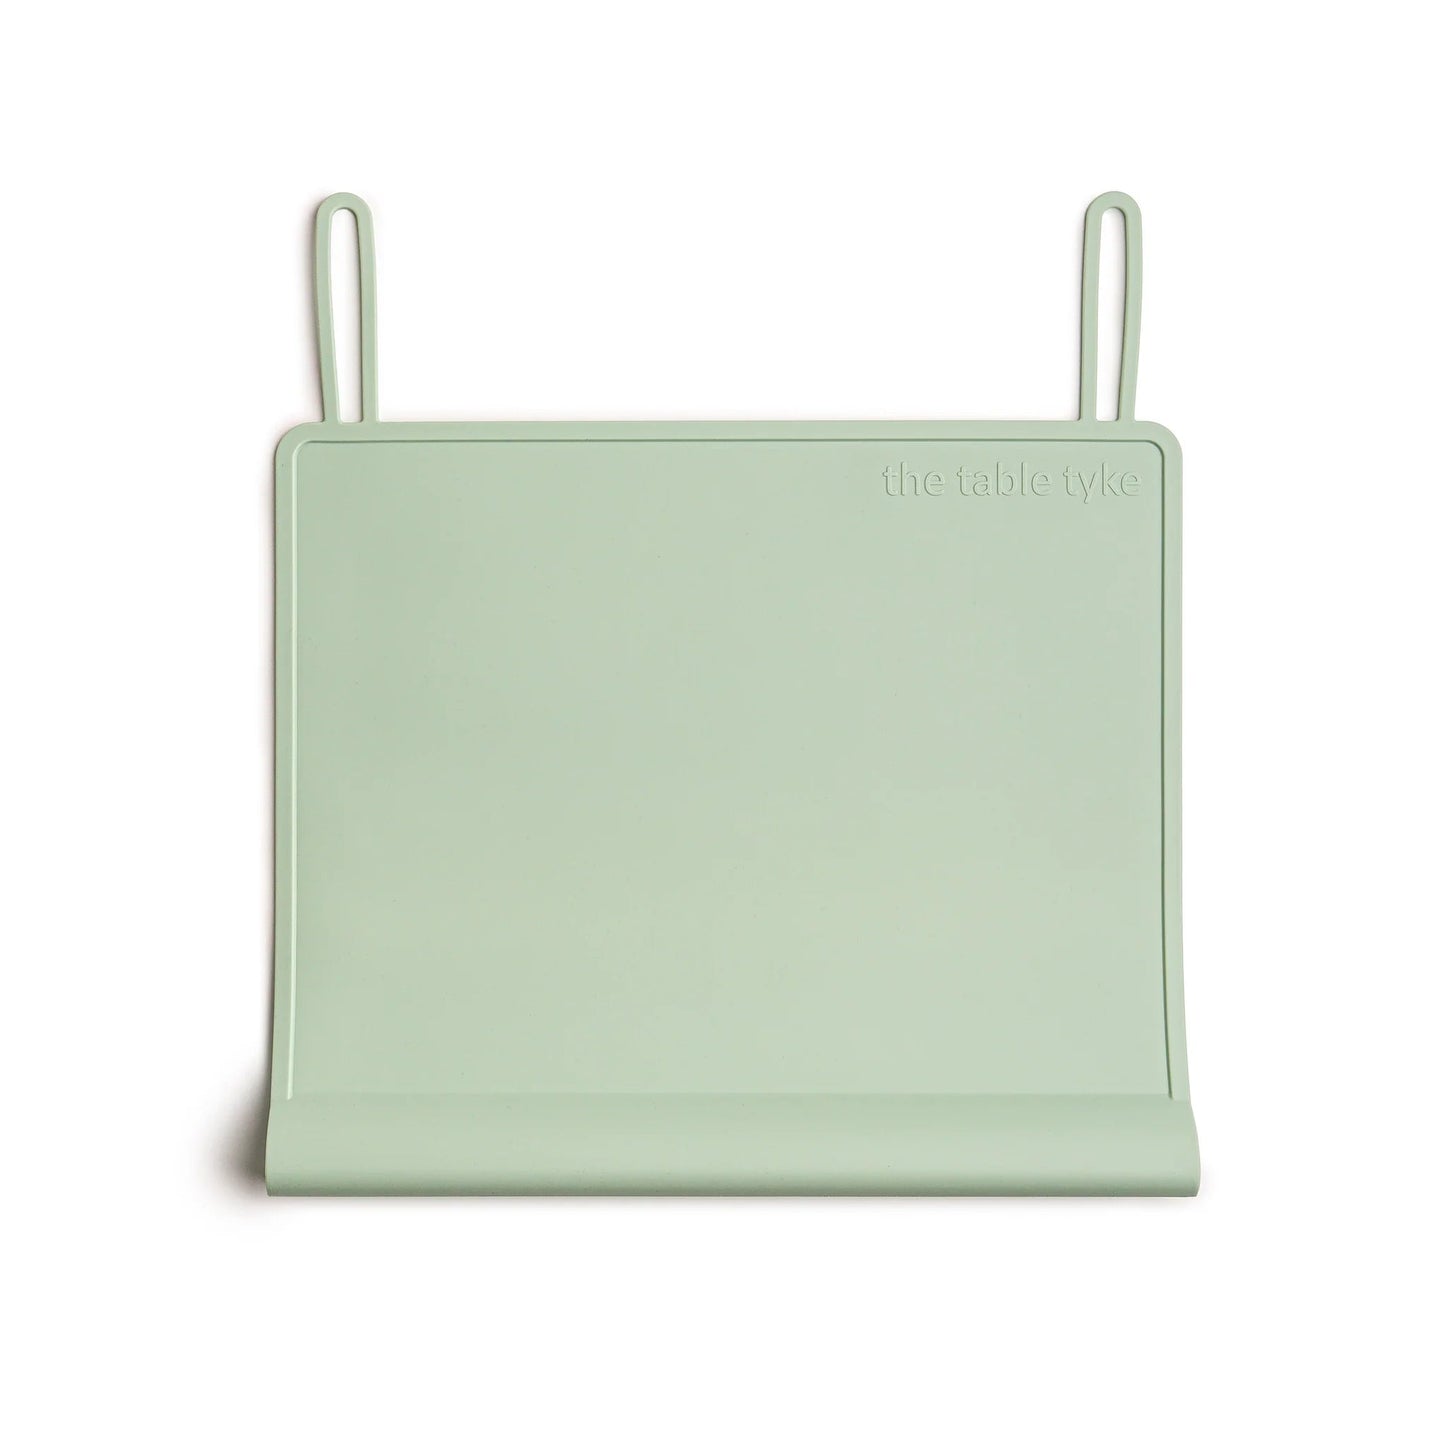 Sage Green Table Tyke Placemat 180 BABY GEAR The Table Tyke 